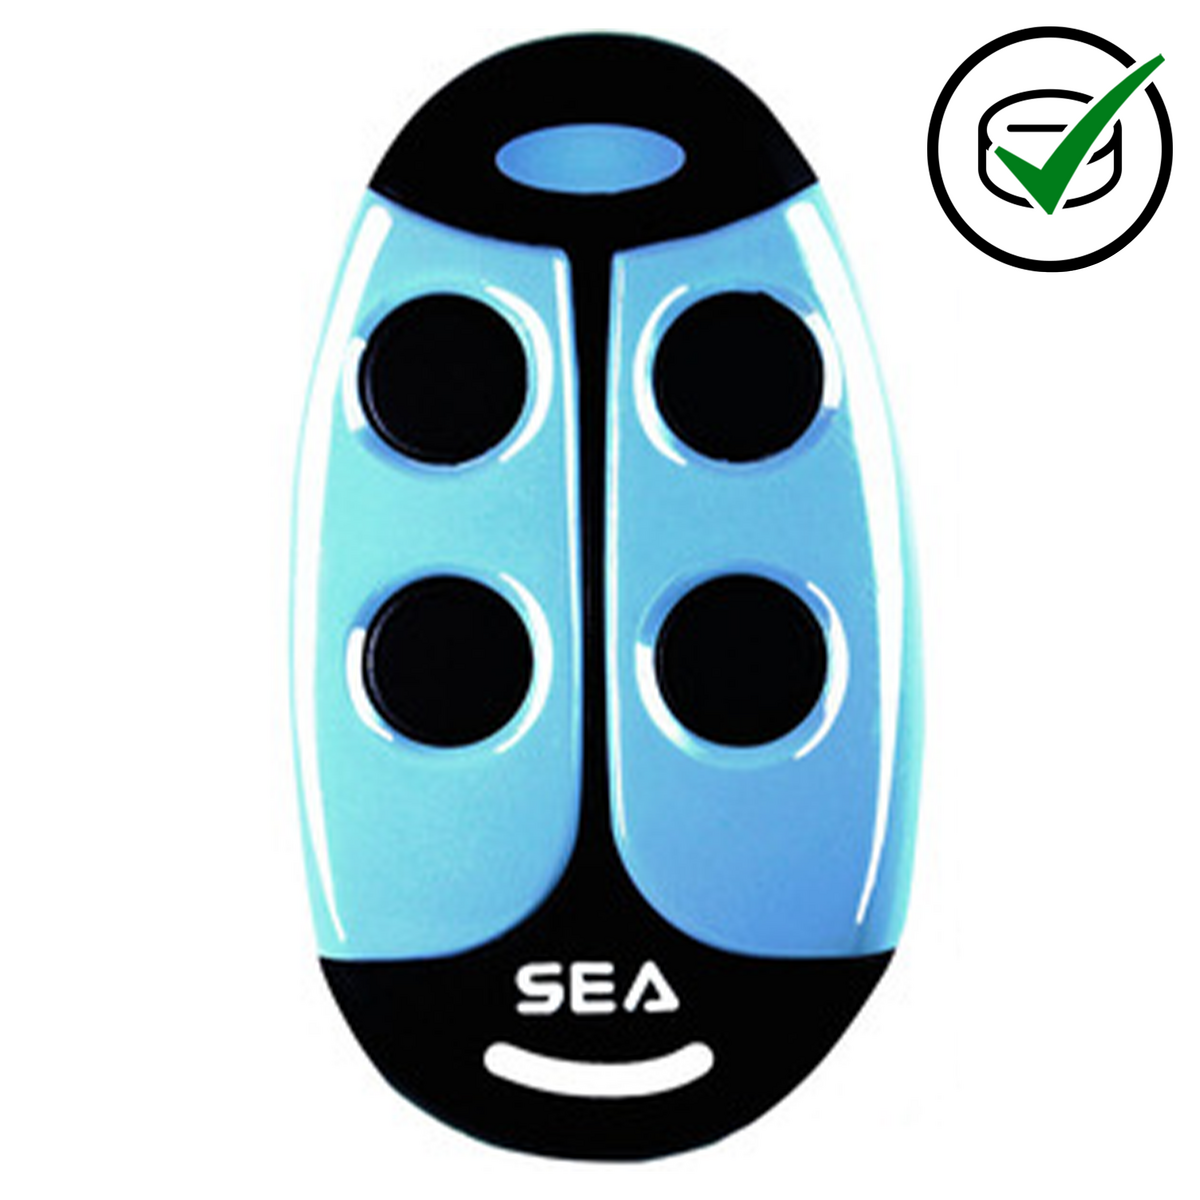 Genuine SEA remote handset 433.93MHz, suitable for SEA wireless receivers